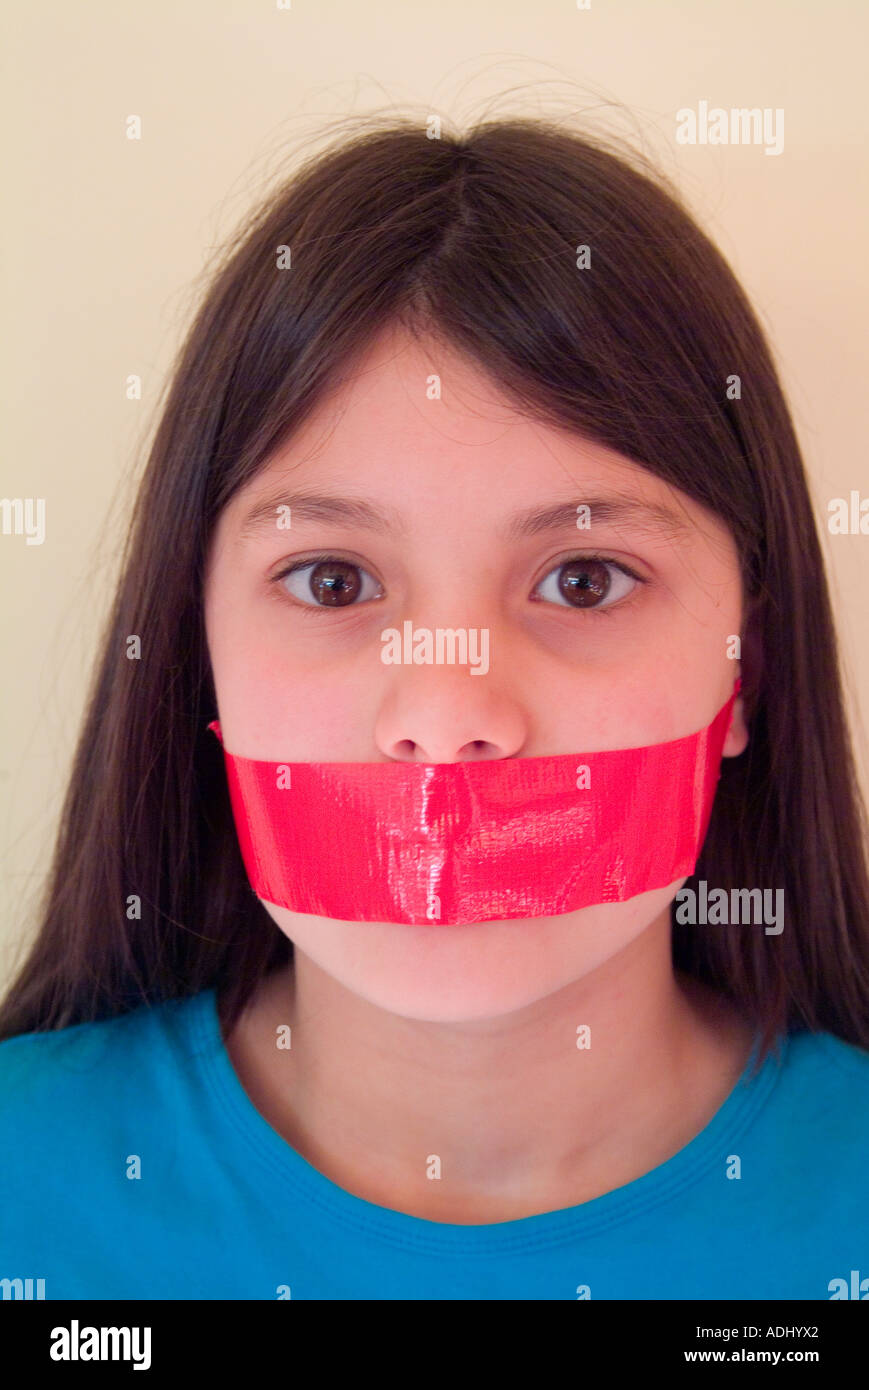 Gagged Mouth Stockfotos And Gagged Mouth Bilder Alamy